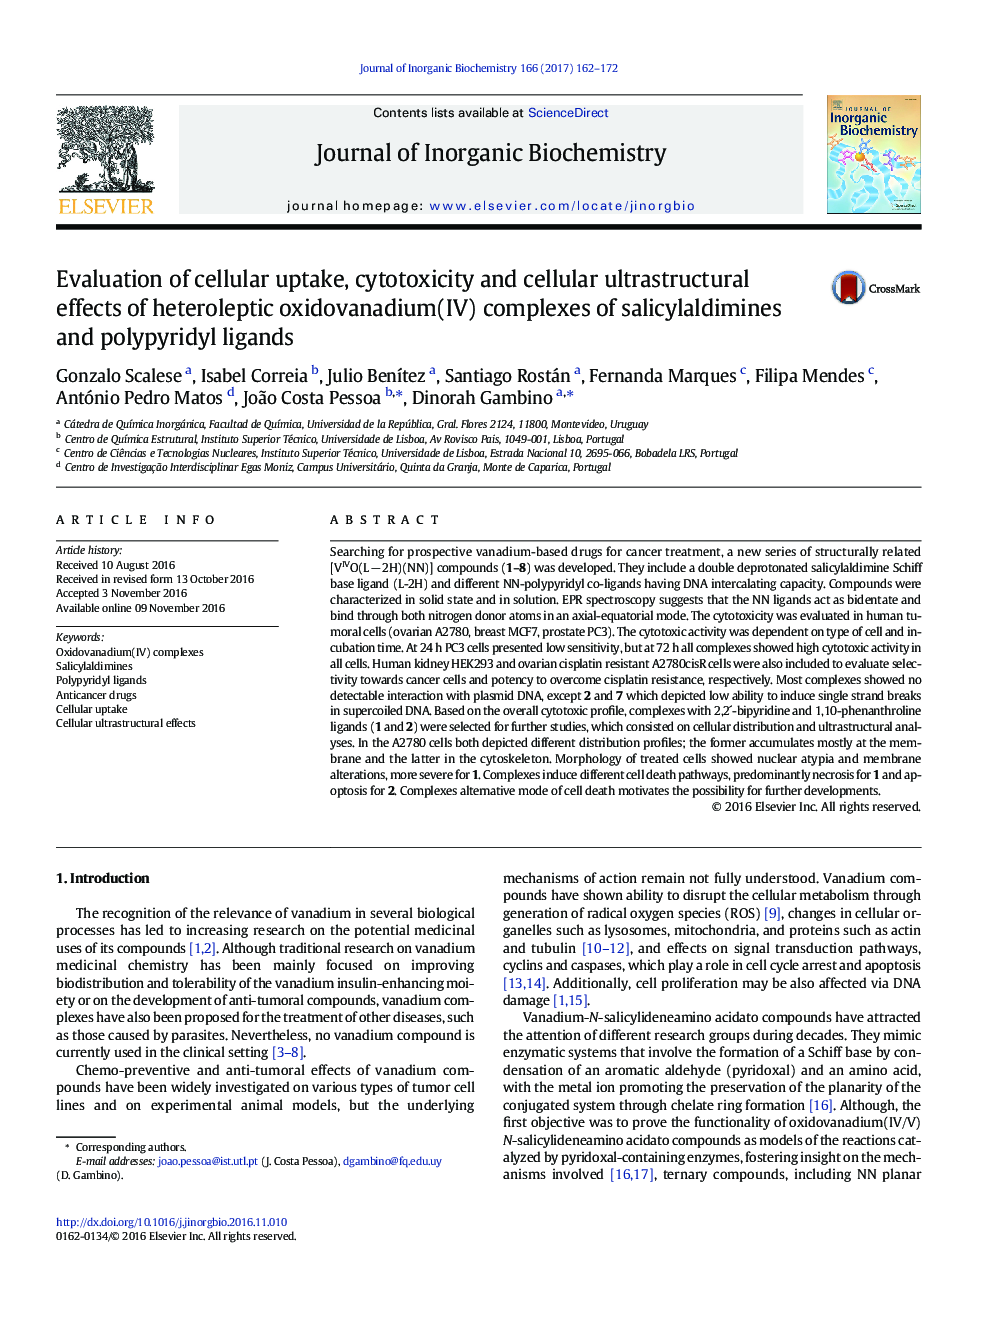 Evaluation of cellular uptake, cytotoxicity and cellular ultrastructural effects of heteroleptic oxidovanadium(IV) complexes of salicylaldimines and polypyridyl ligands